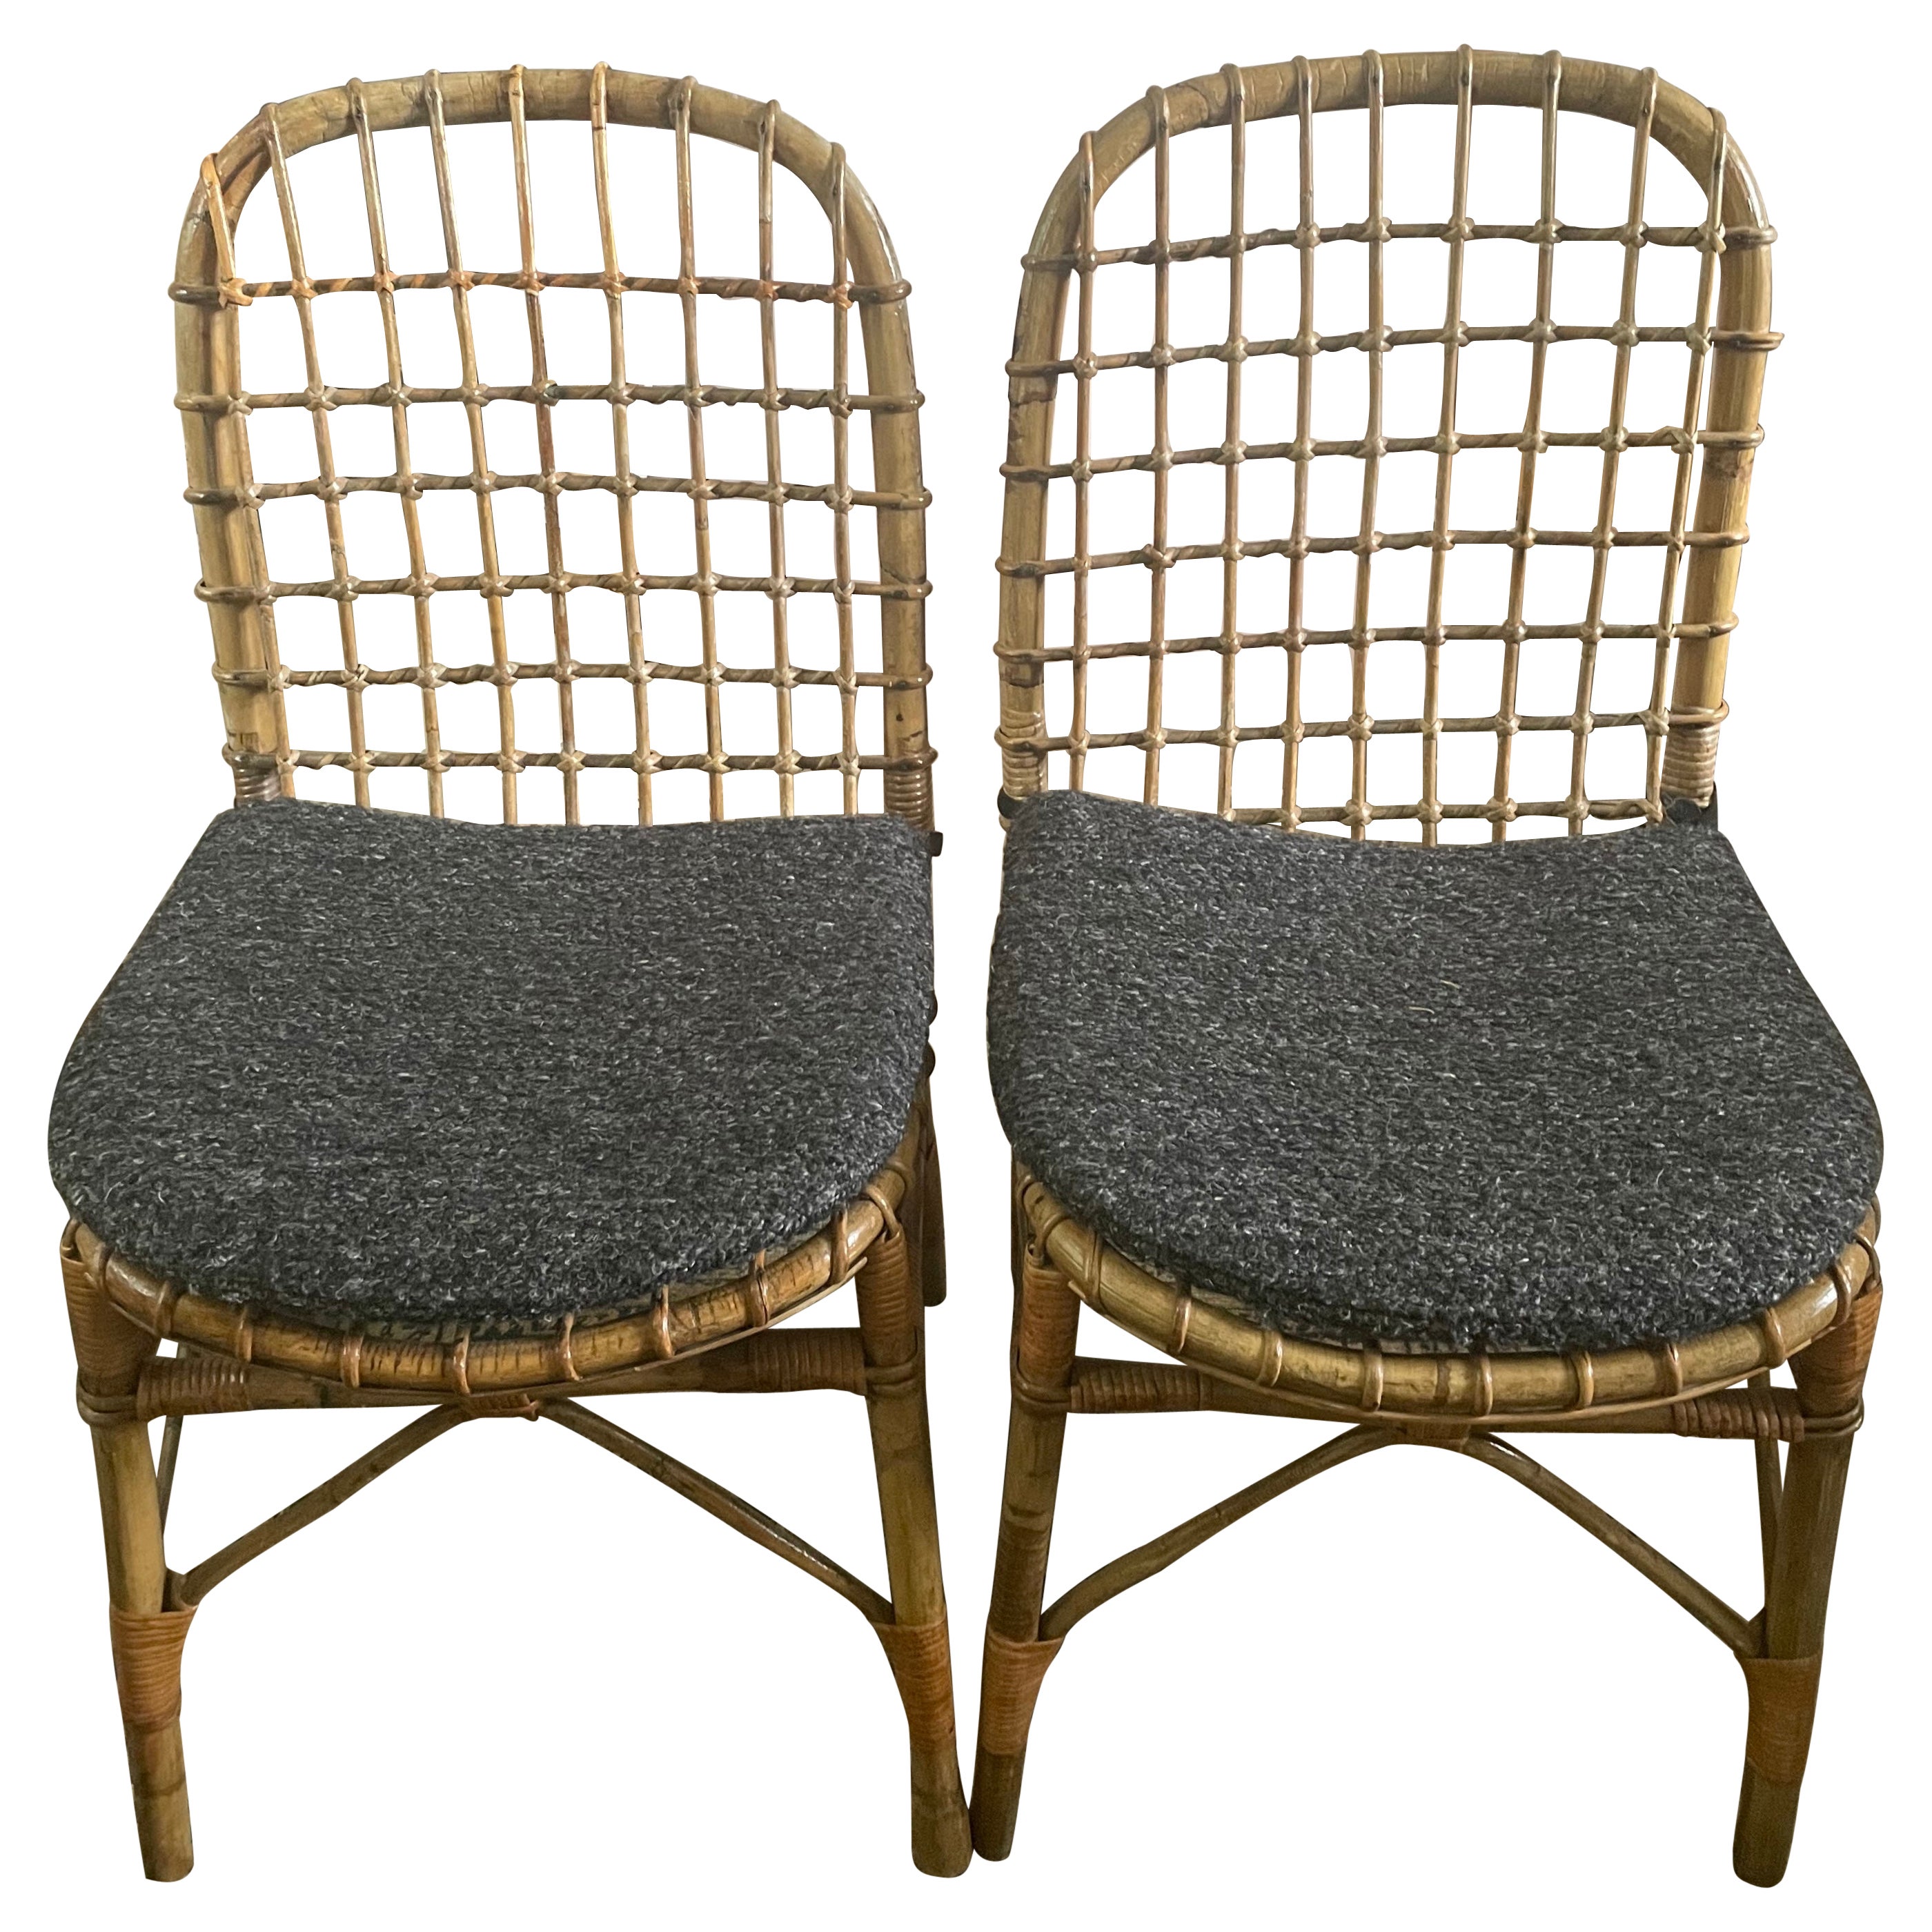 Pair Italian rattan side chairs. Elegant pair Midcentury blond rattan and wicker vintage side chairs. With grey bouclé seat cushions with ties. Italy, mid-1960s
Dimensions: 19